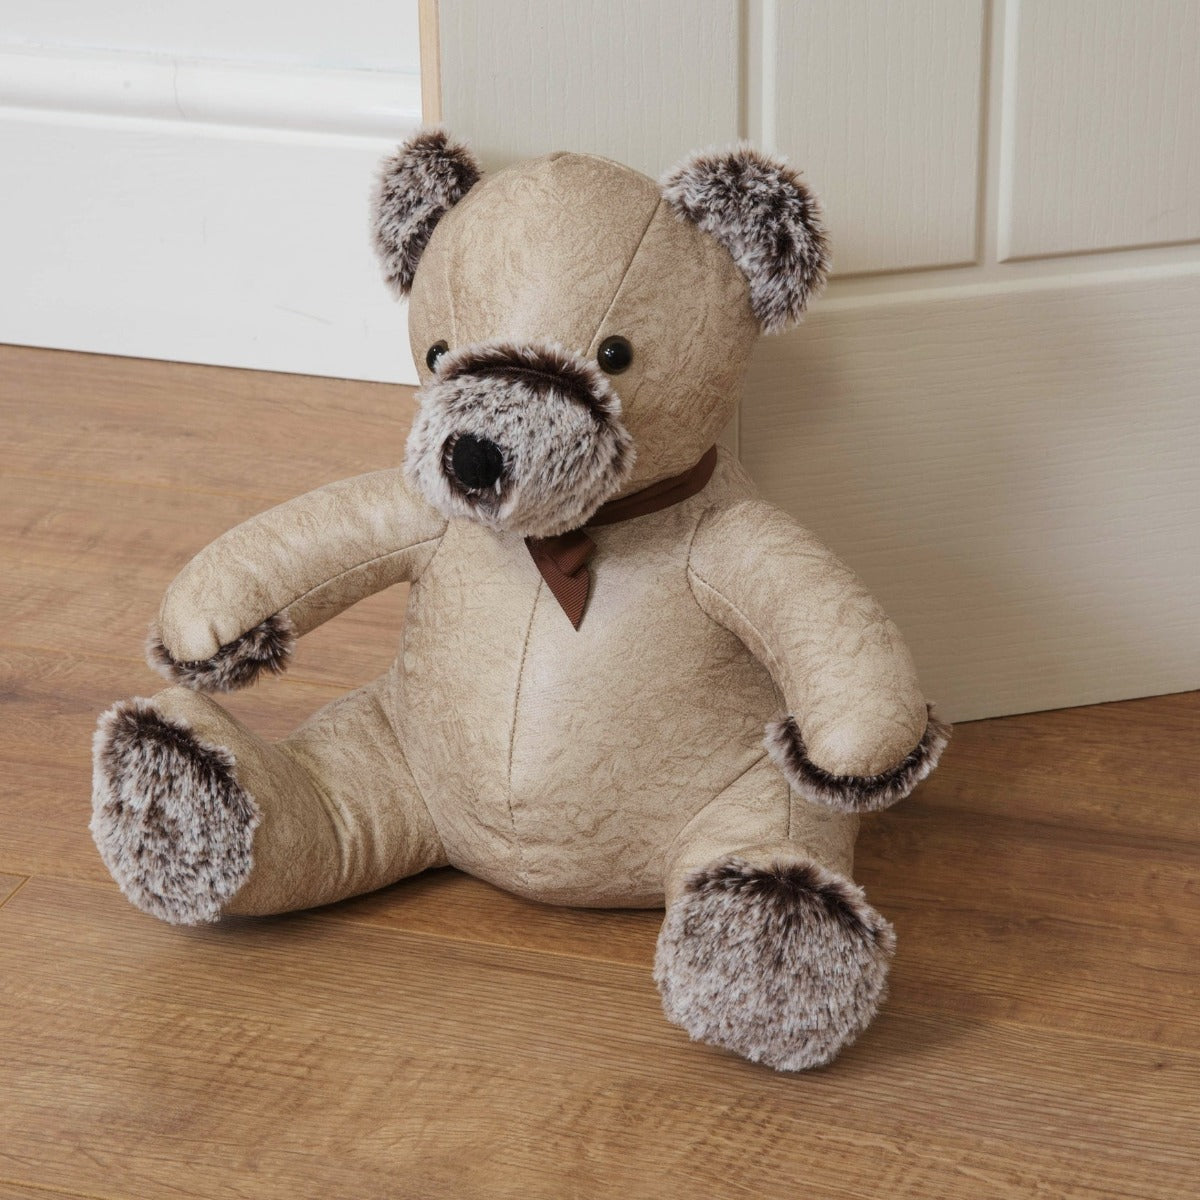 Door Stop - Beige Bear  Bring some warmth and charm to any room with this distressed beige faux leather teddy bear door stop. From the Nature Trail collection by HESTIA® - bring some subtle Spring vitality to your home.